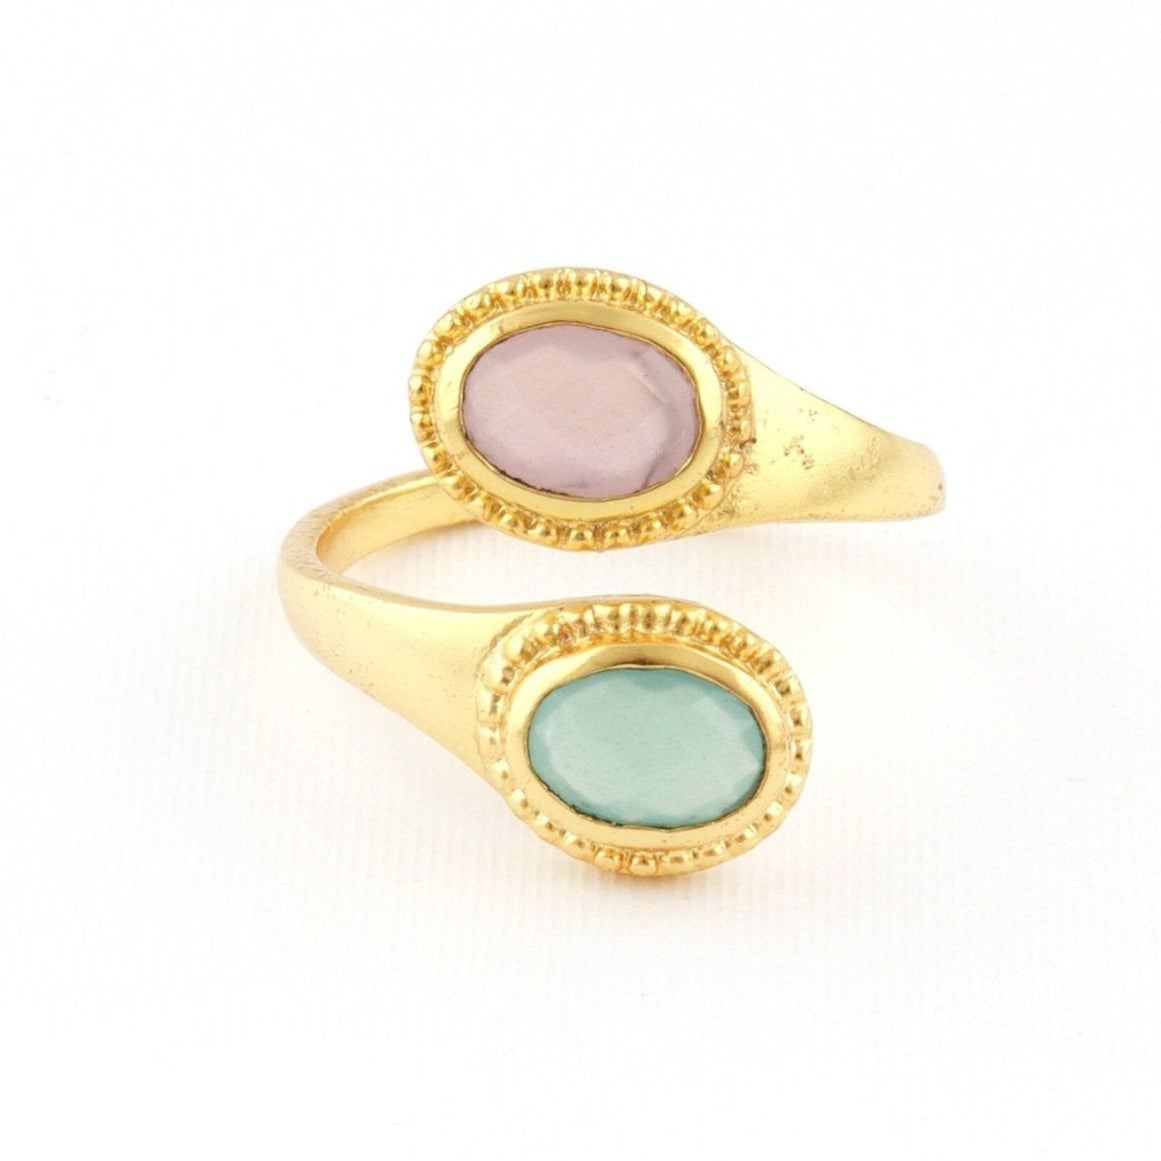 Aqua and pink chalcedony Gemstone Gold Plated Ring - SBJ